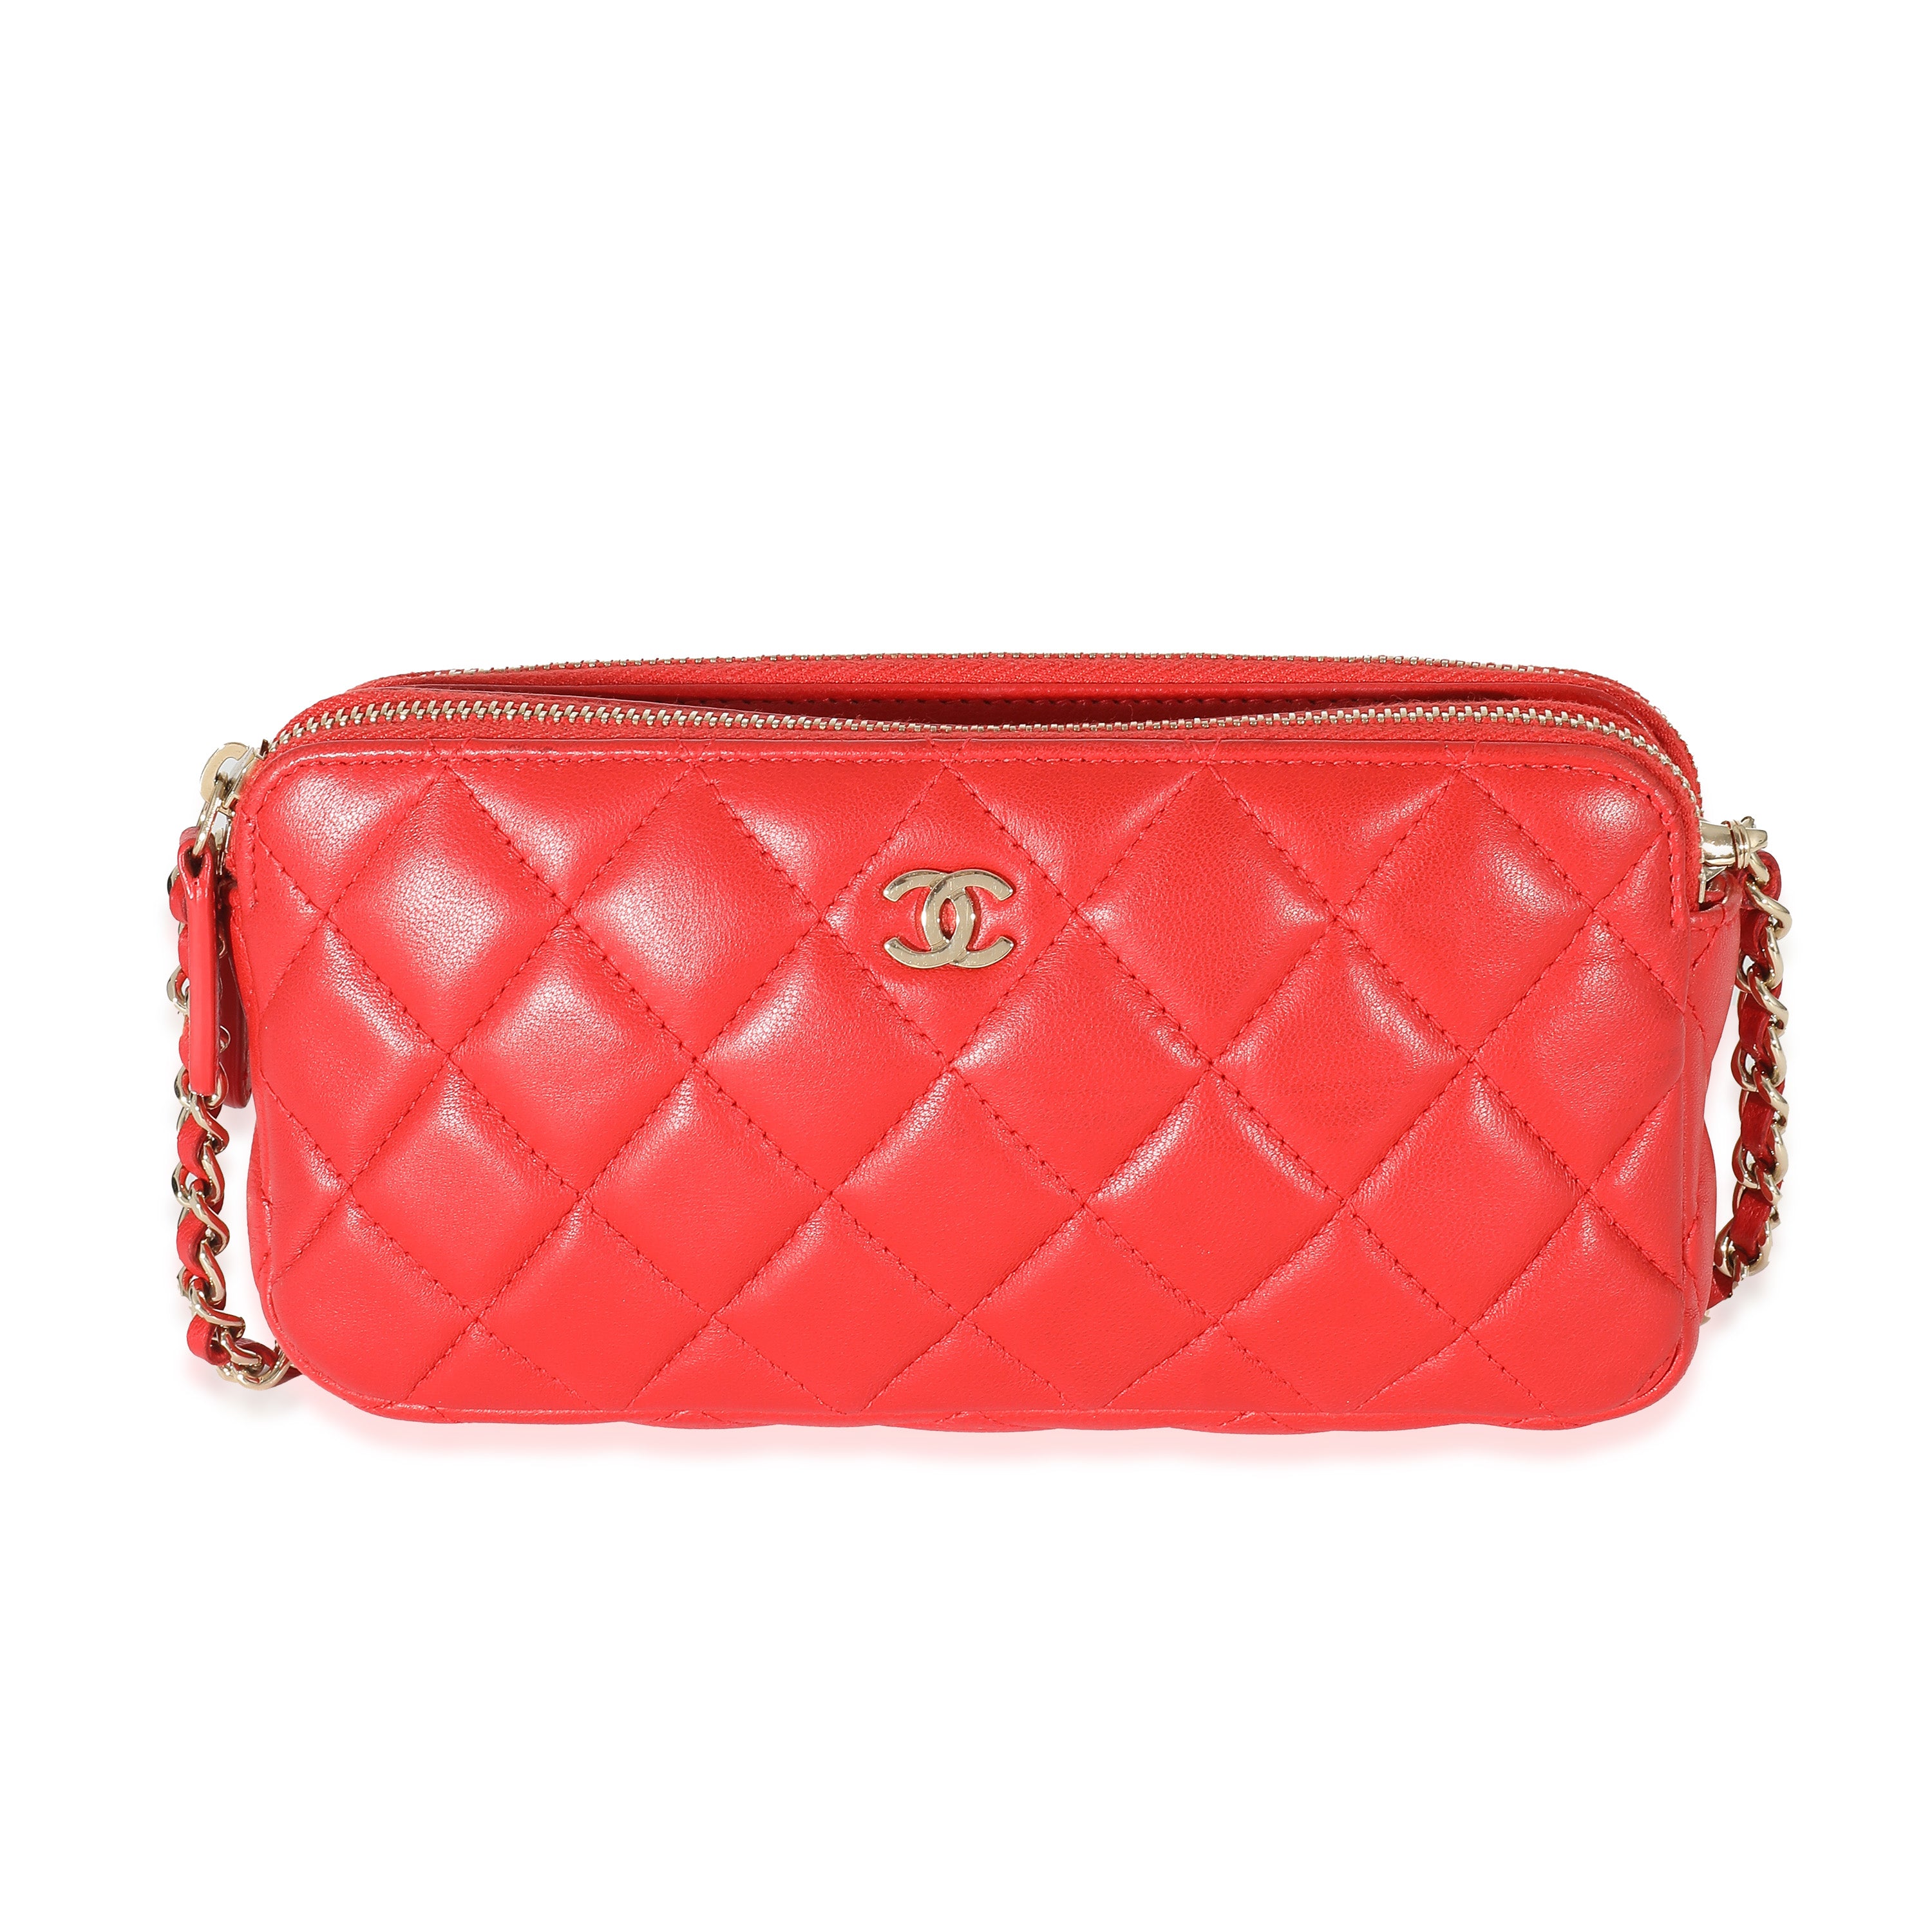 Chanel Red Lambskin Double Zip Clutch With Chain, myGemma